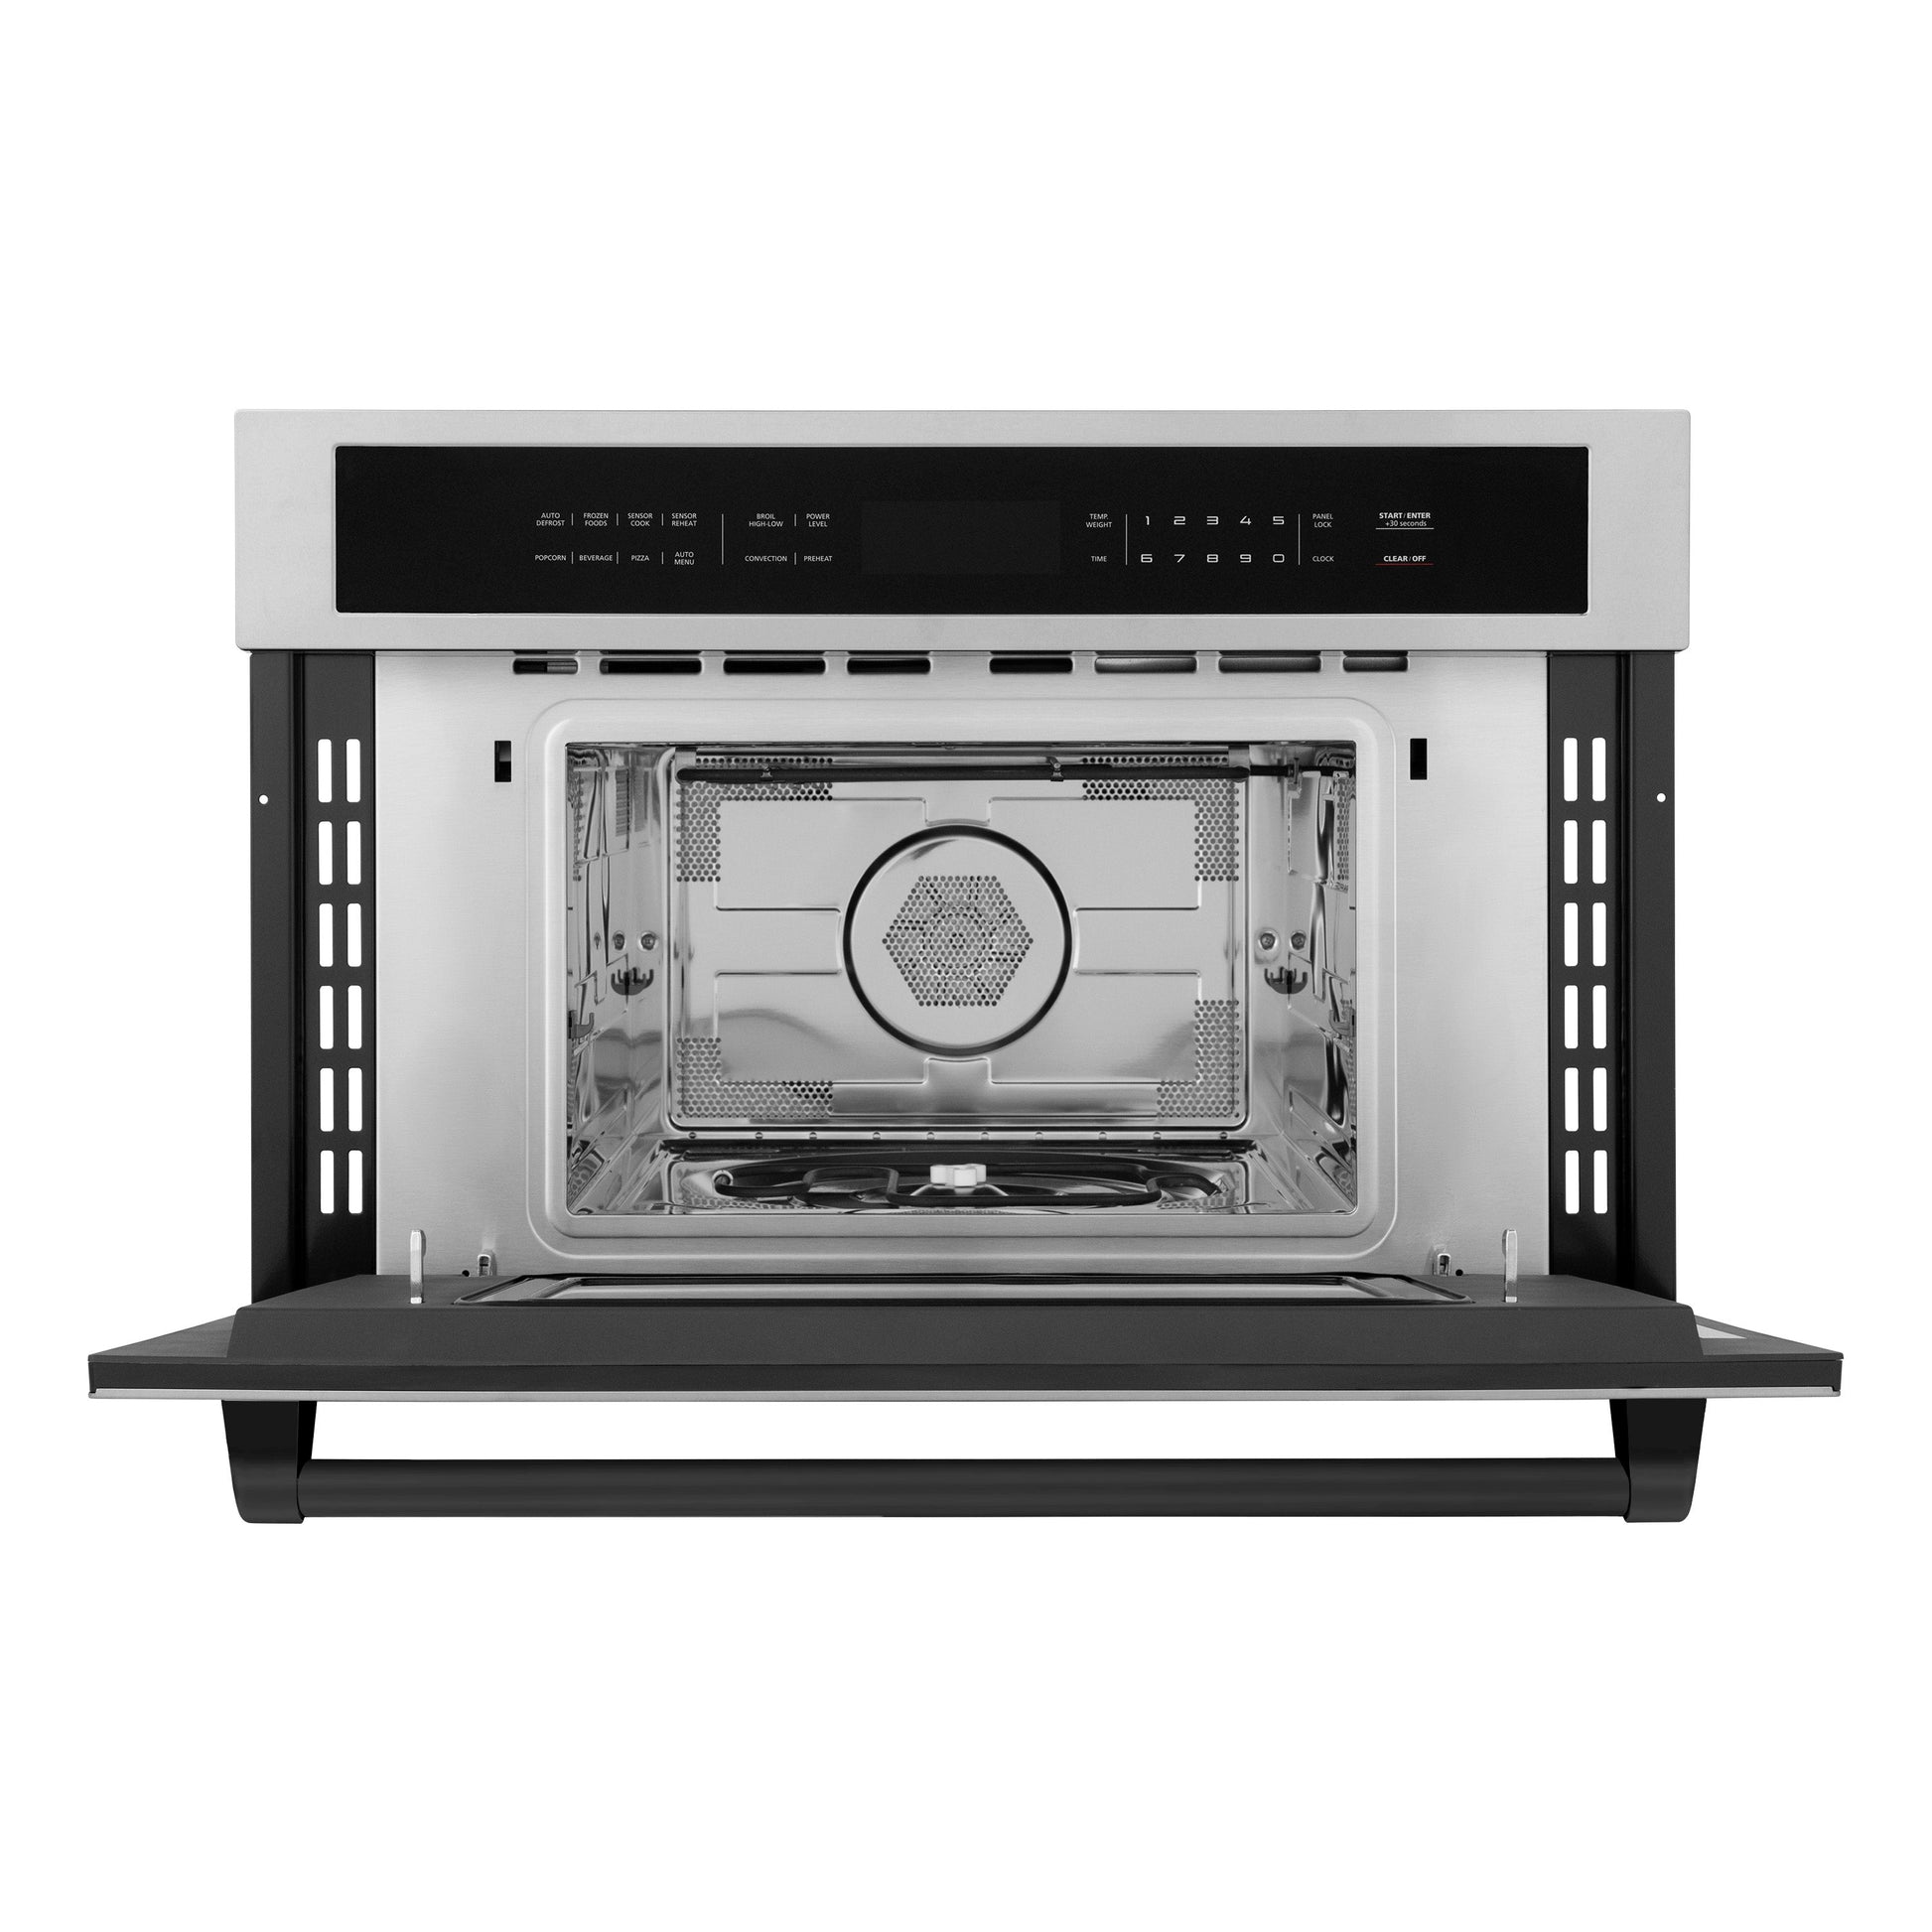 ZLINE Autograph Edition 30" Built-in Convection Microwave Oven - Stainless Steel with Accents